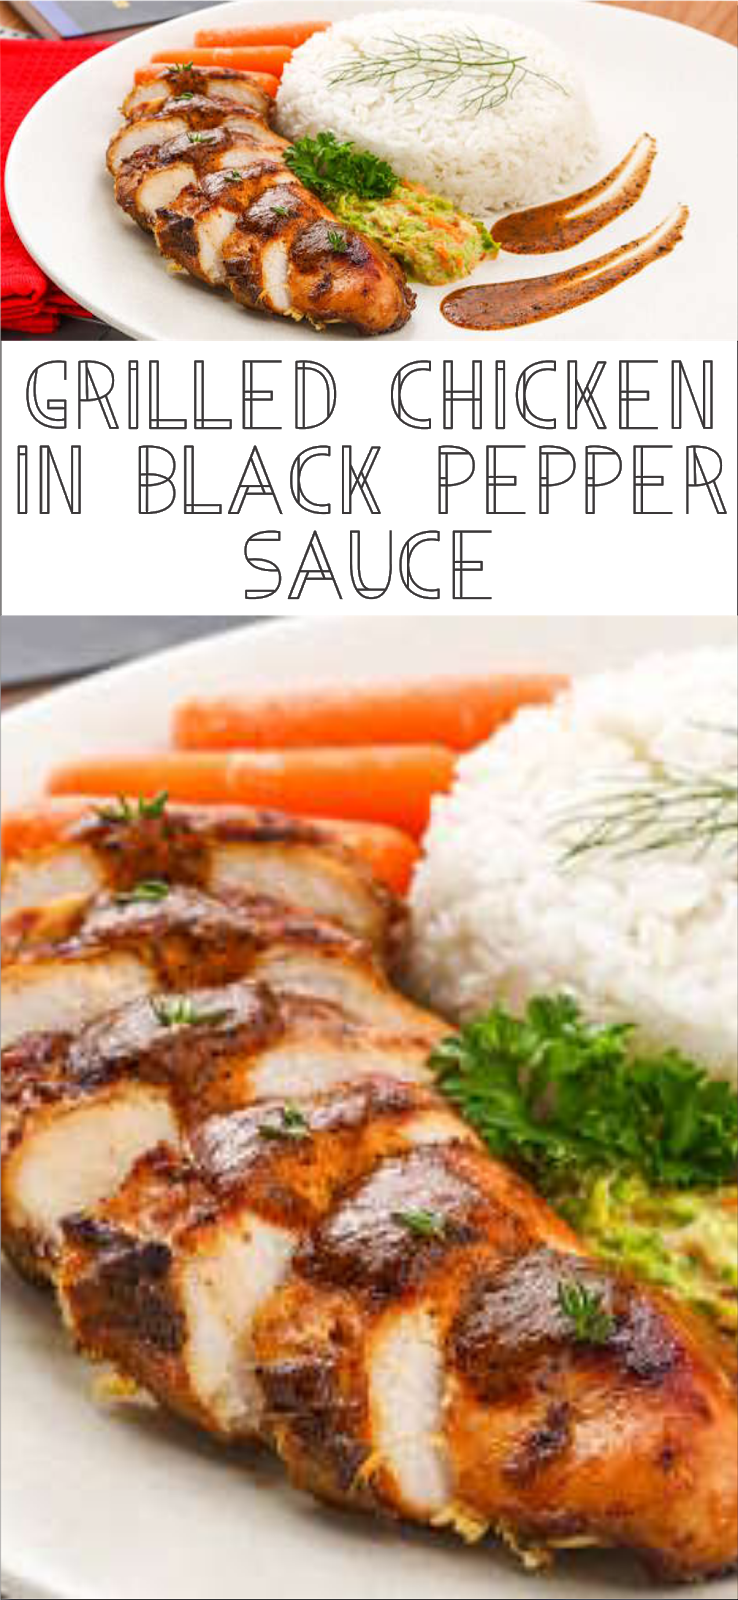 Grilled Chicken In Black Pepper Sauce | Floats CO Does Fried Chicken Float When Done